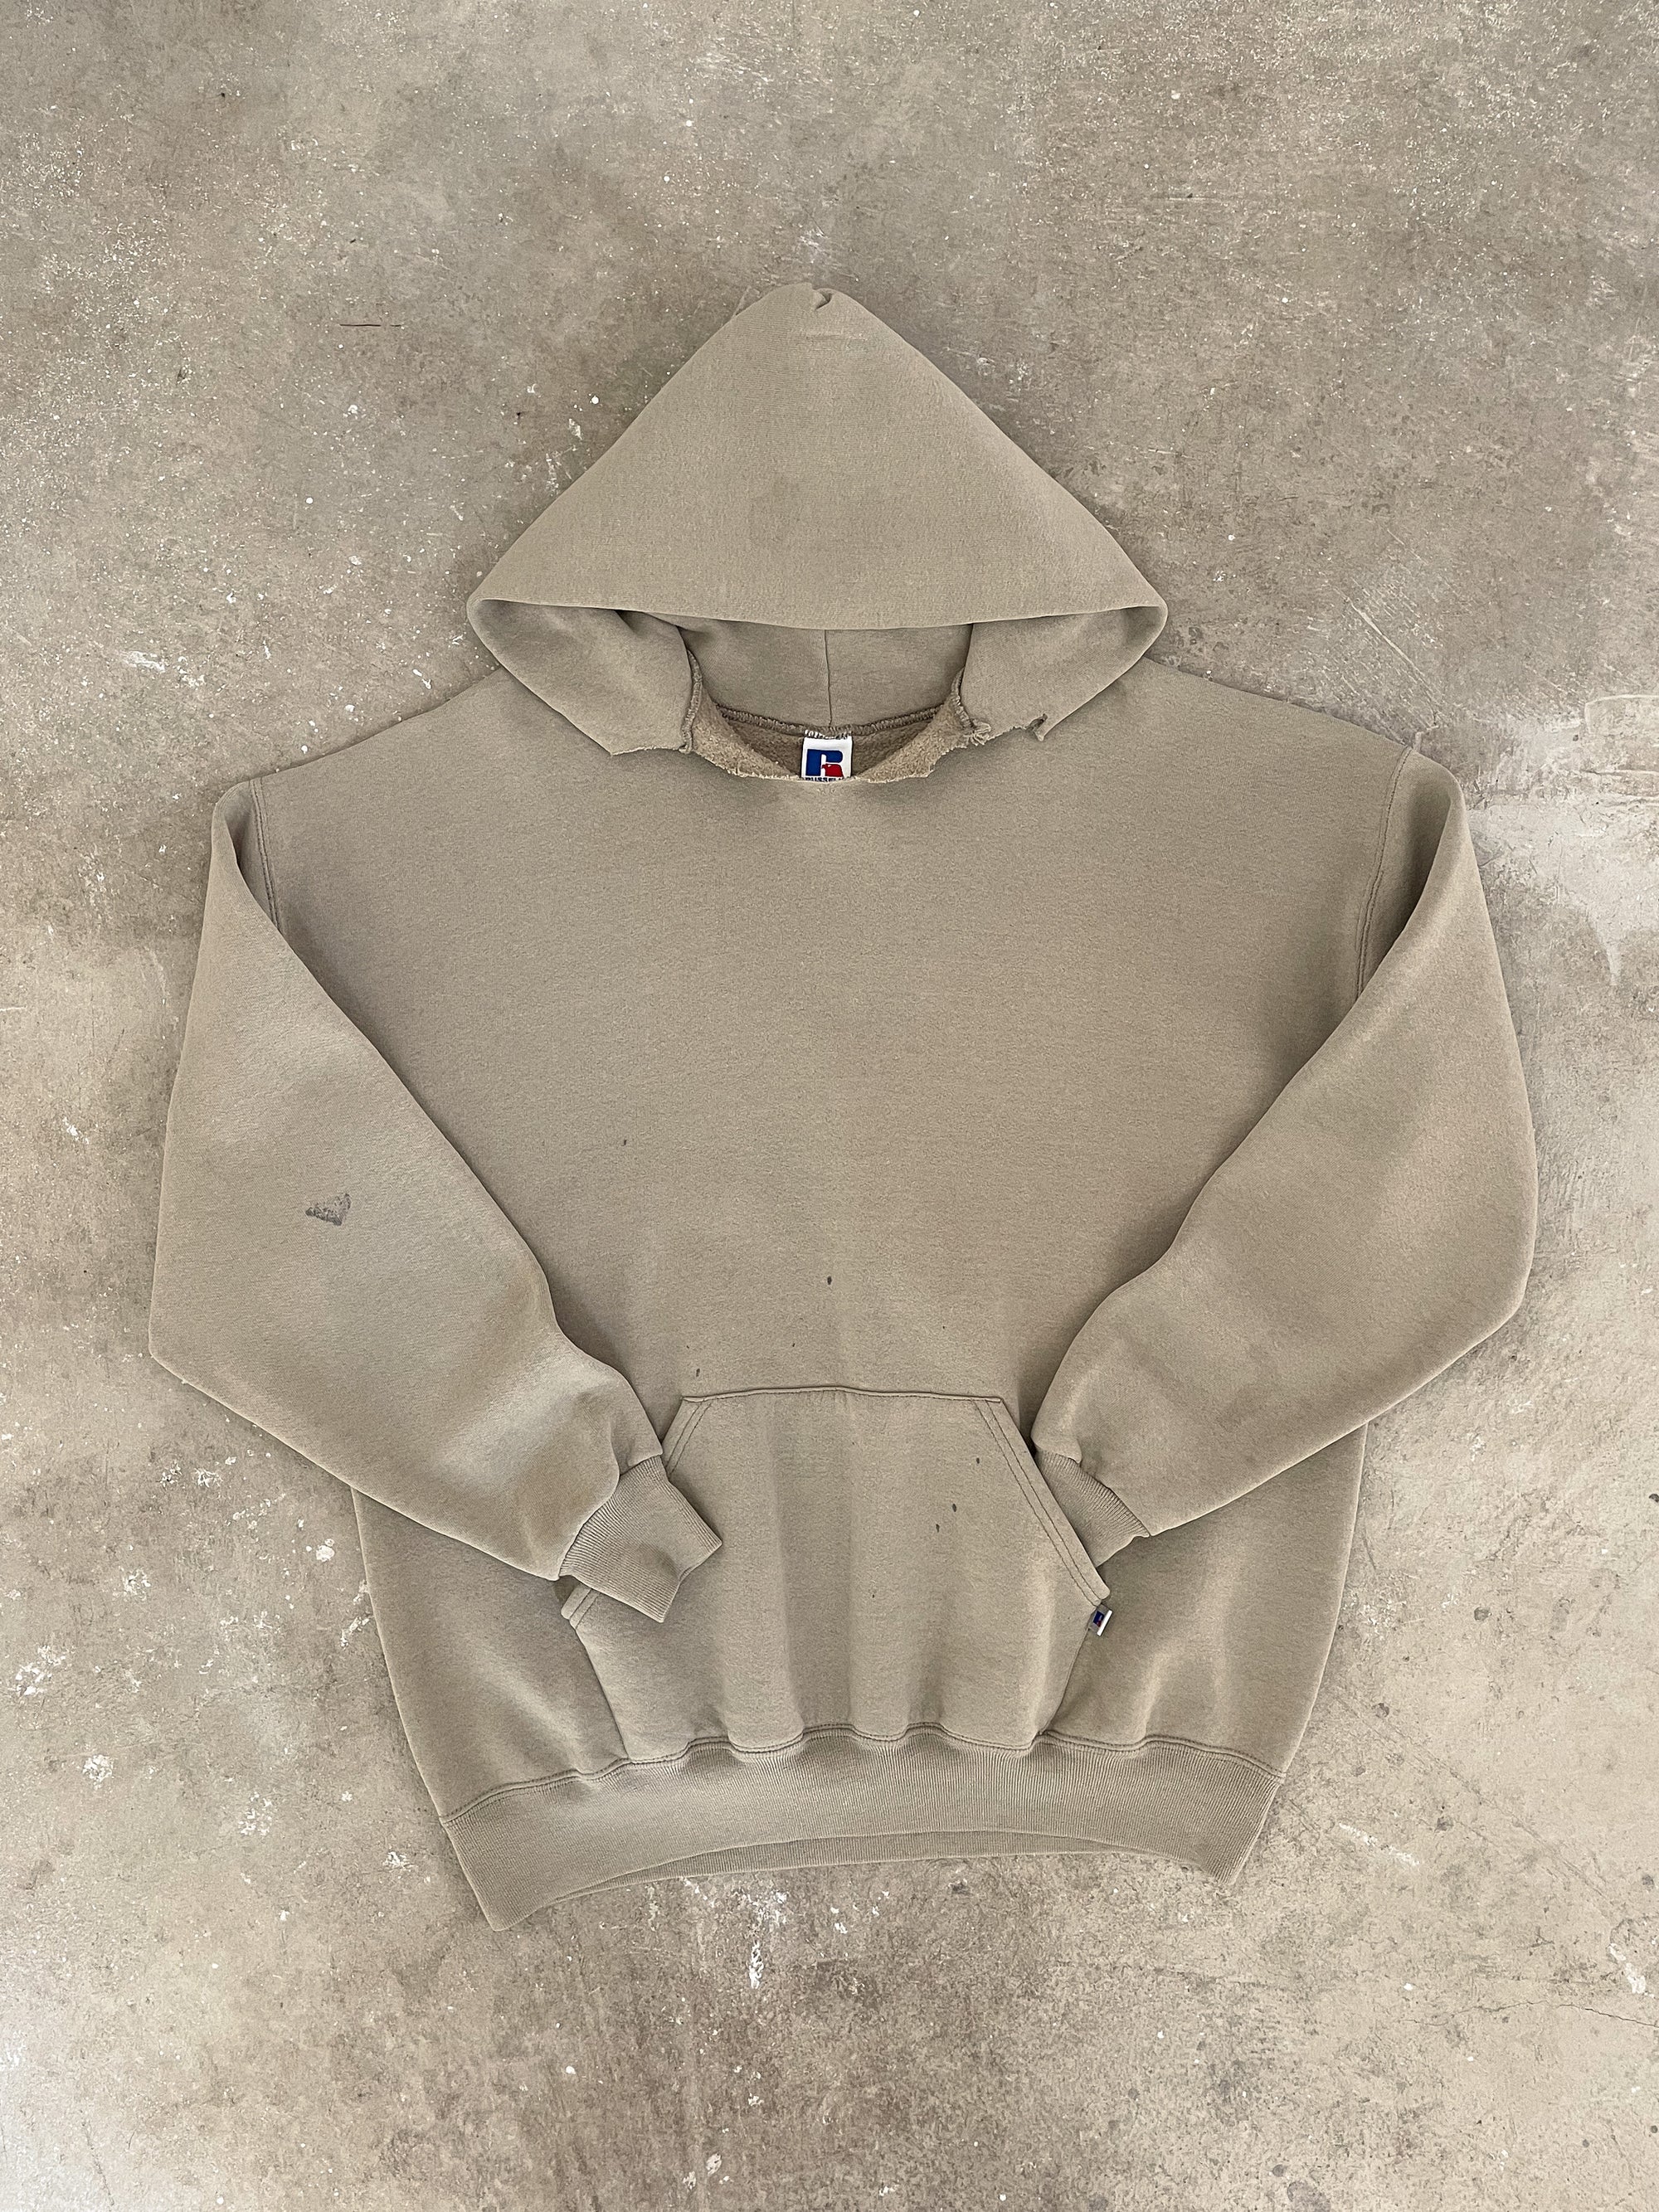 1990s/00s Russell Distressed Sand Hoodie (XL/XXL)